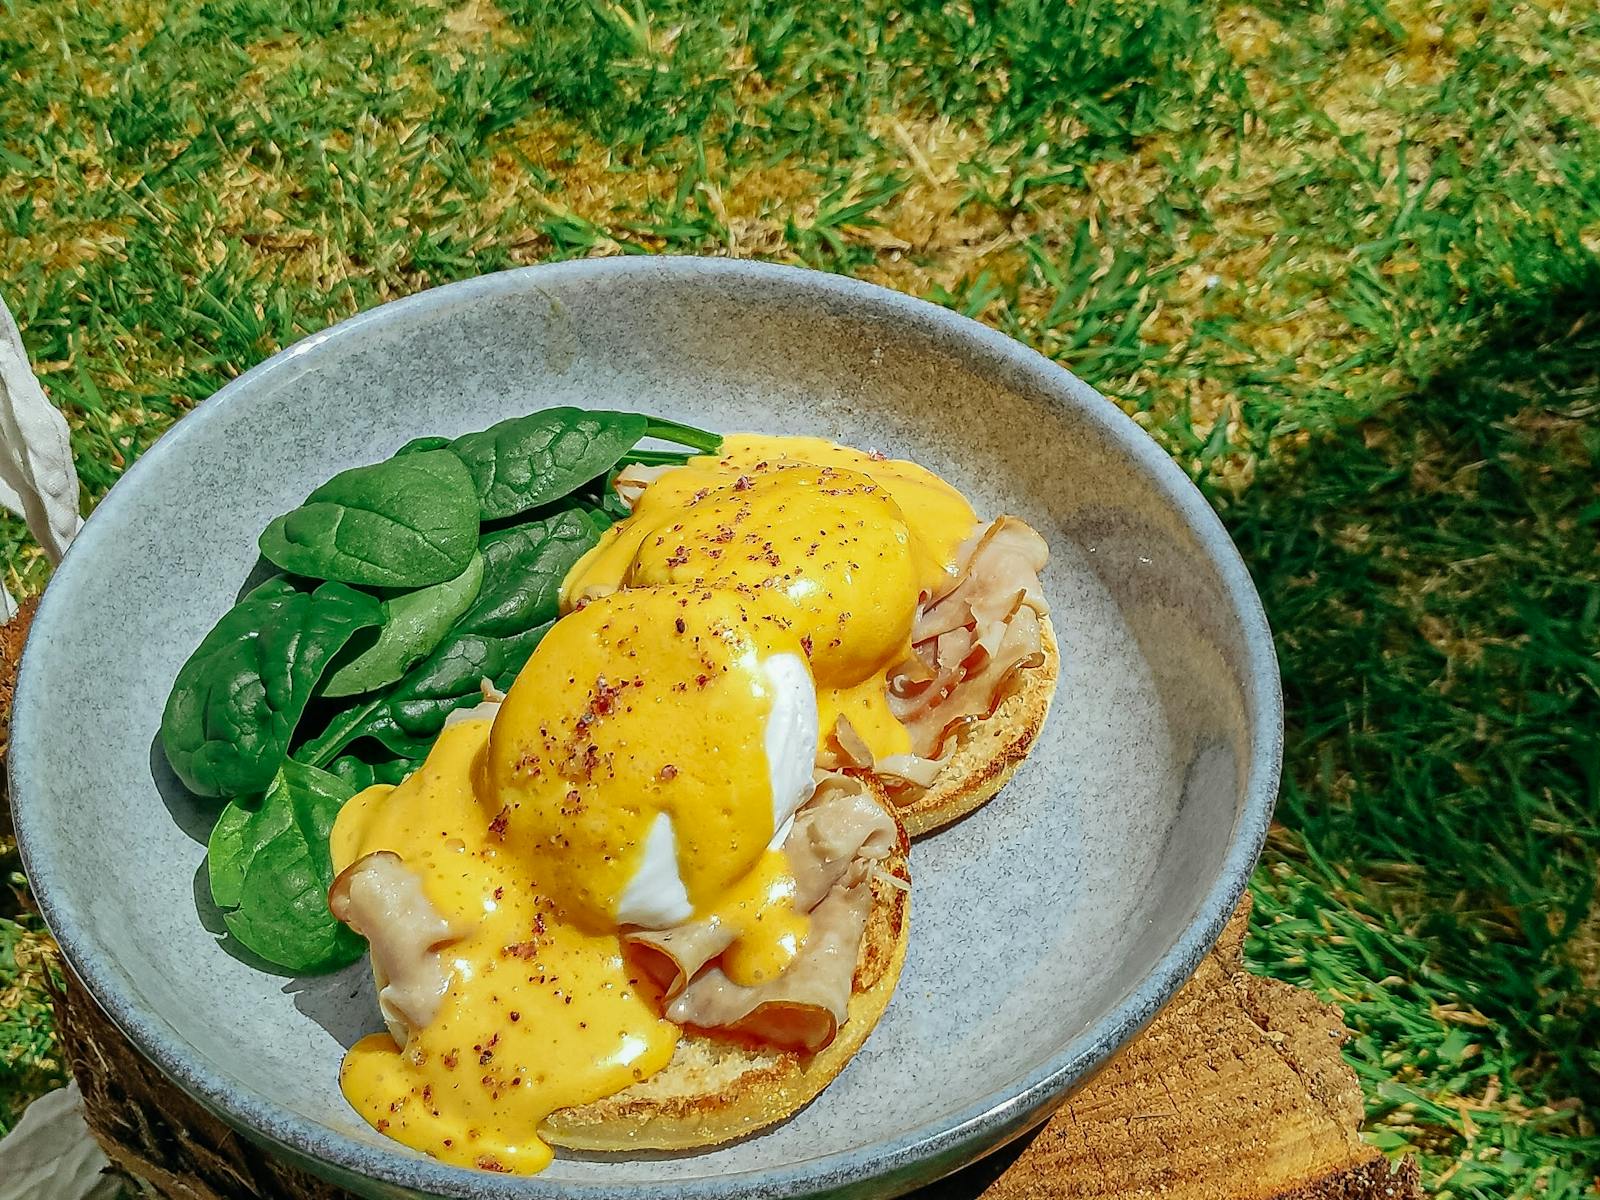 A photo of eggs benedict outside in the garden.